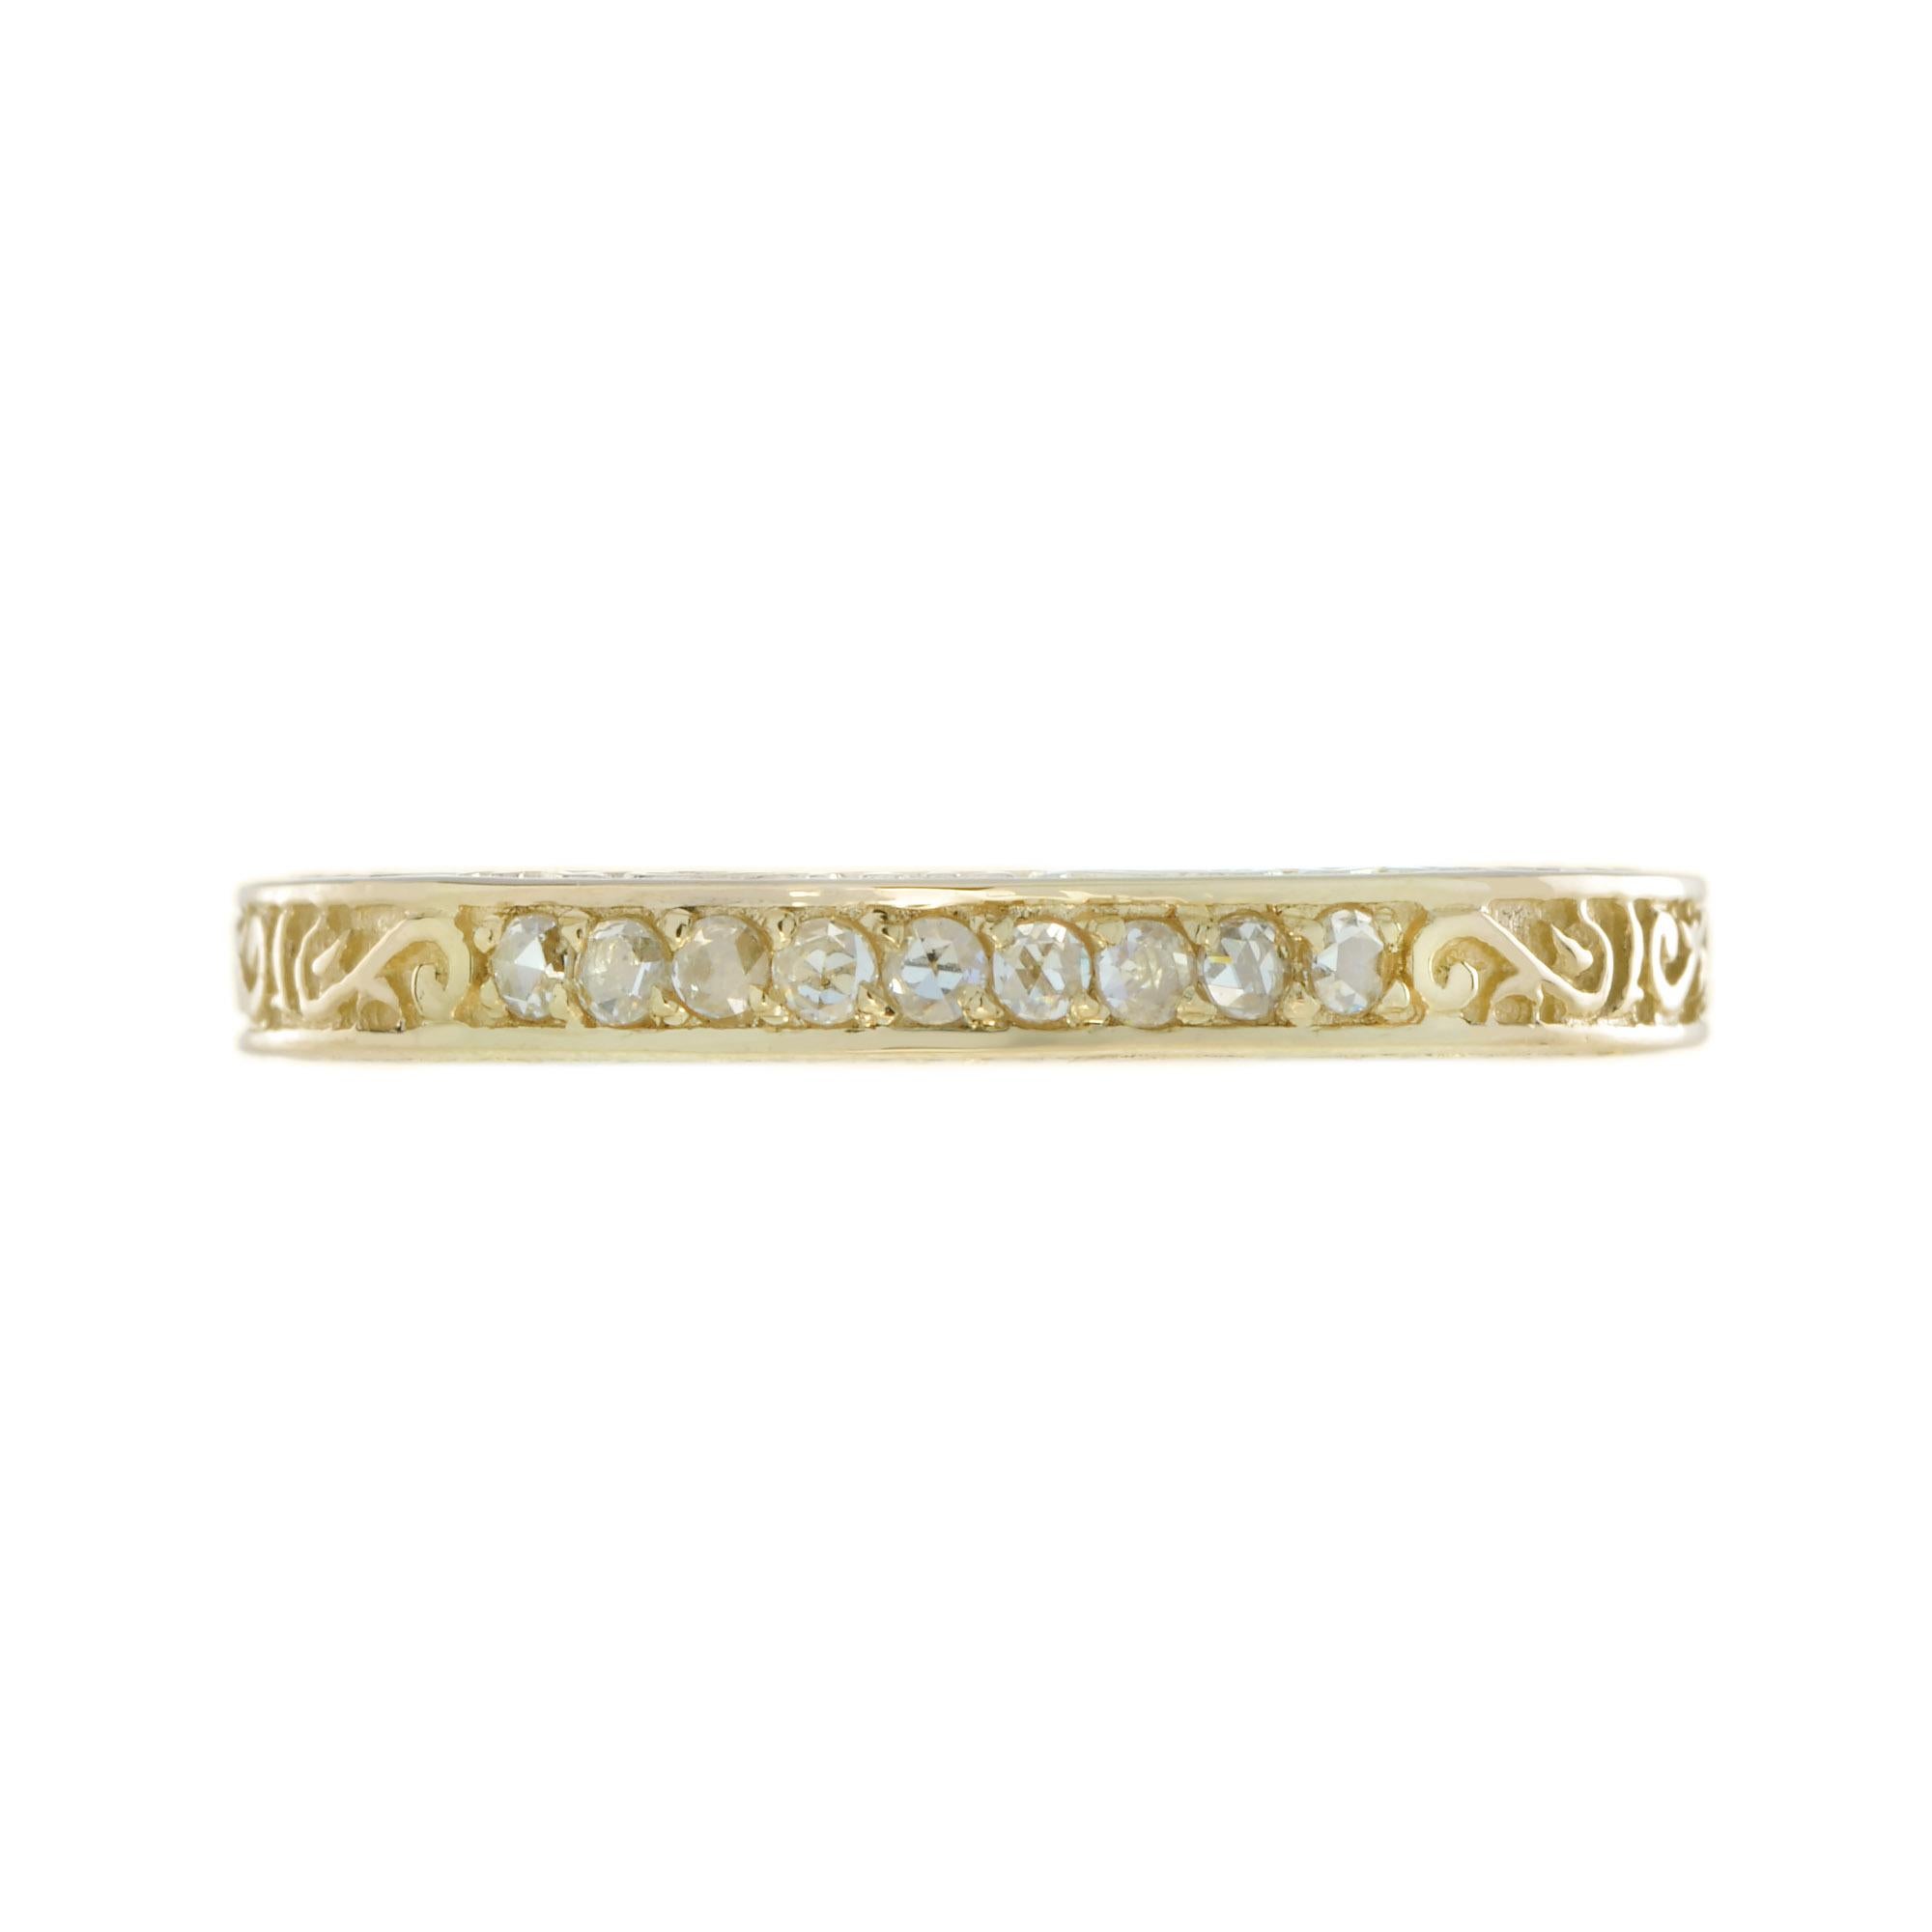 This is a lovely Victorian era design band ring in 14k yellow gold. It is set with nine rose cut diamond, estimated total weight is .14 carat H color, SI clarity overall. Beautifully made yellow gold band with engraved design.

Ring